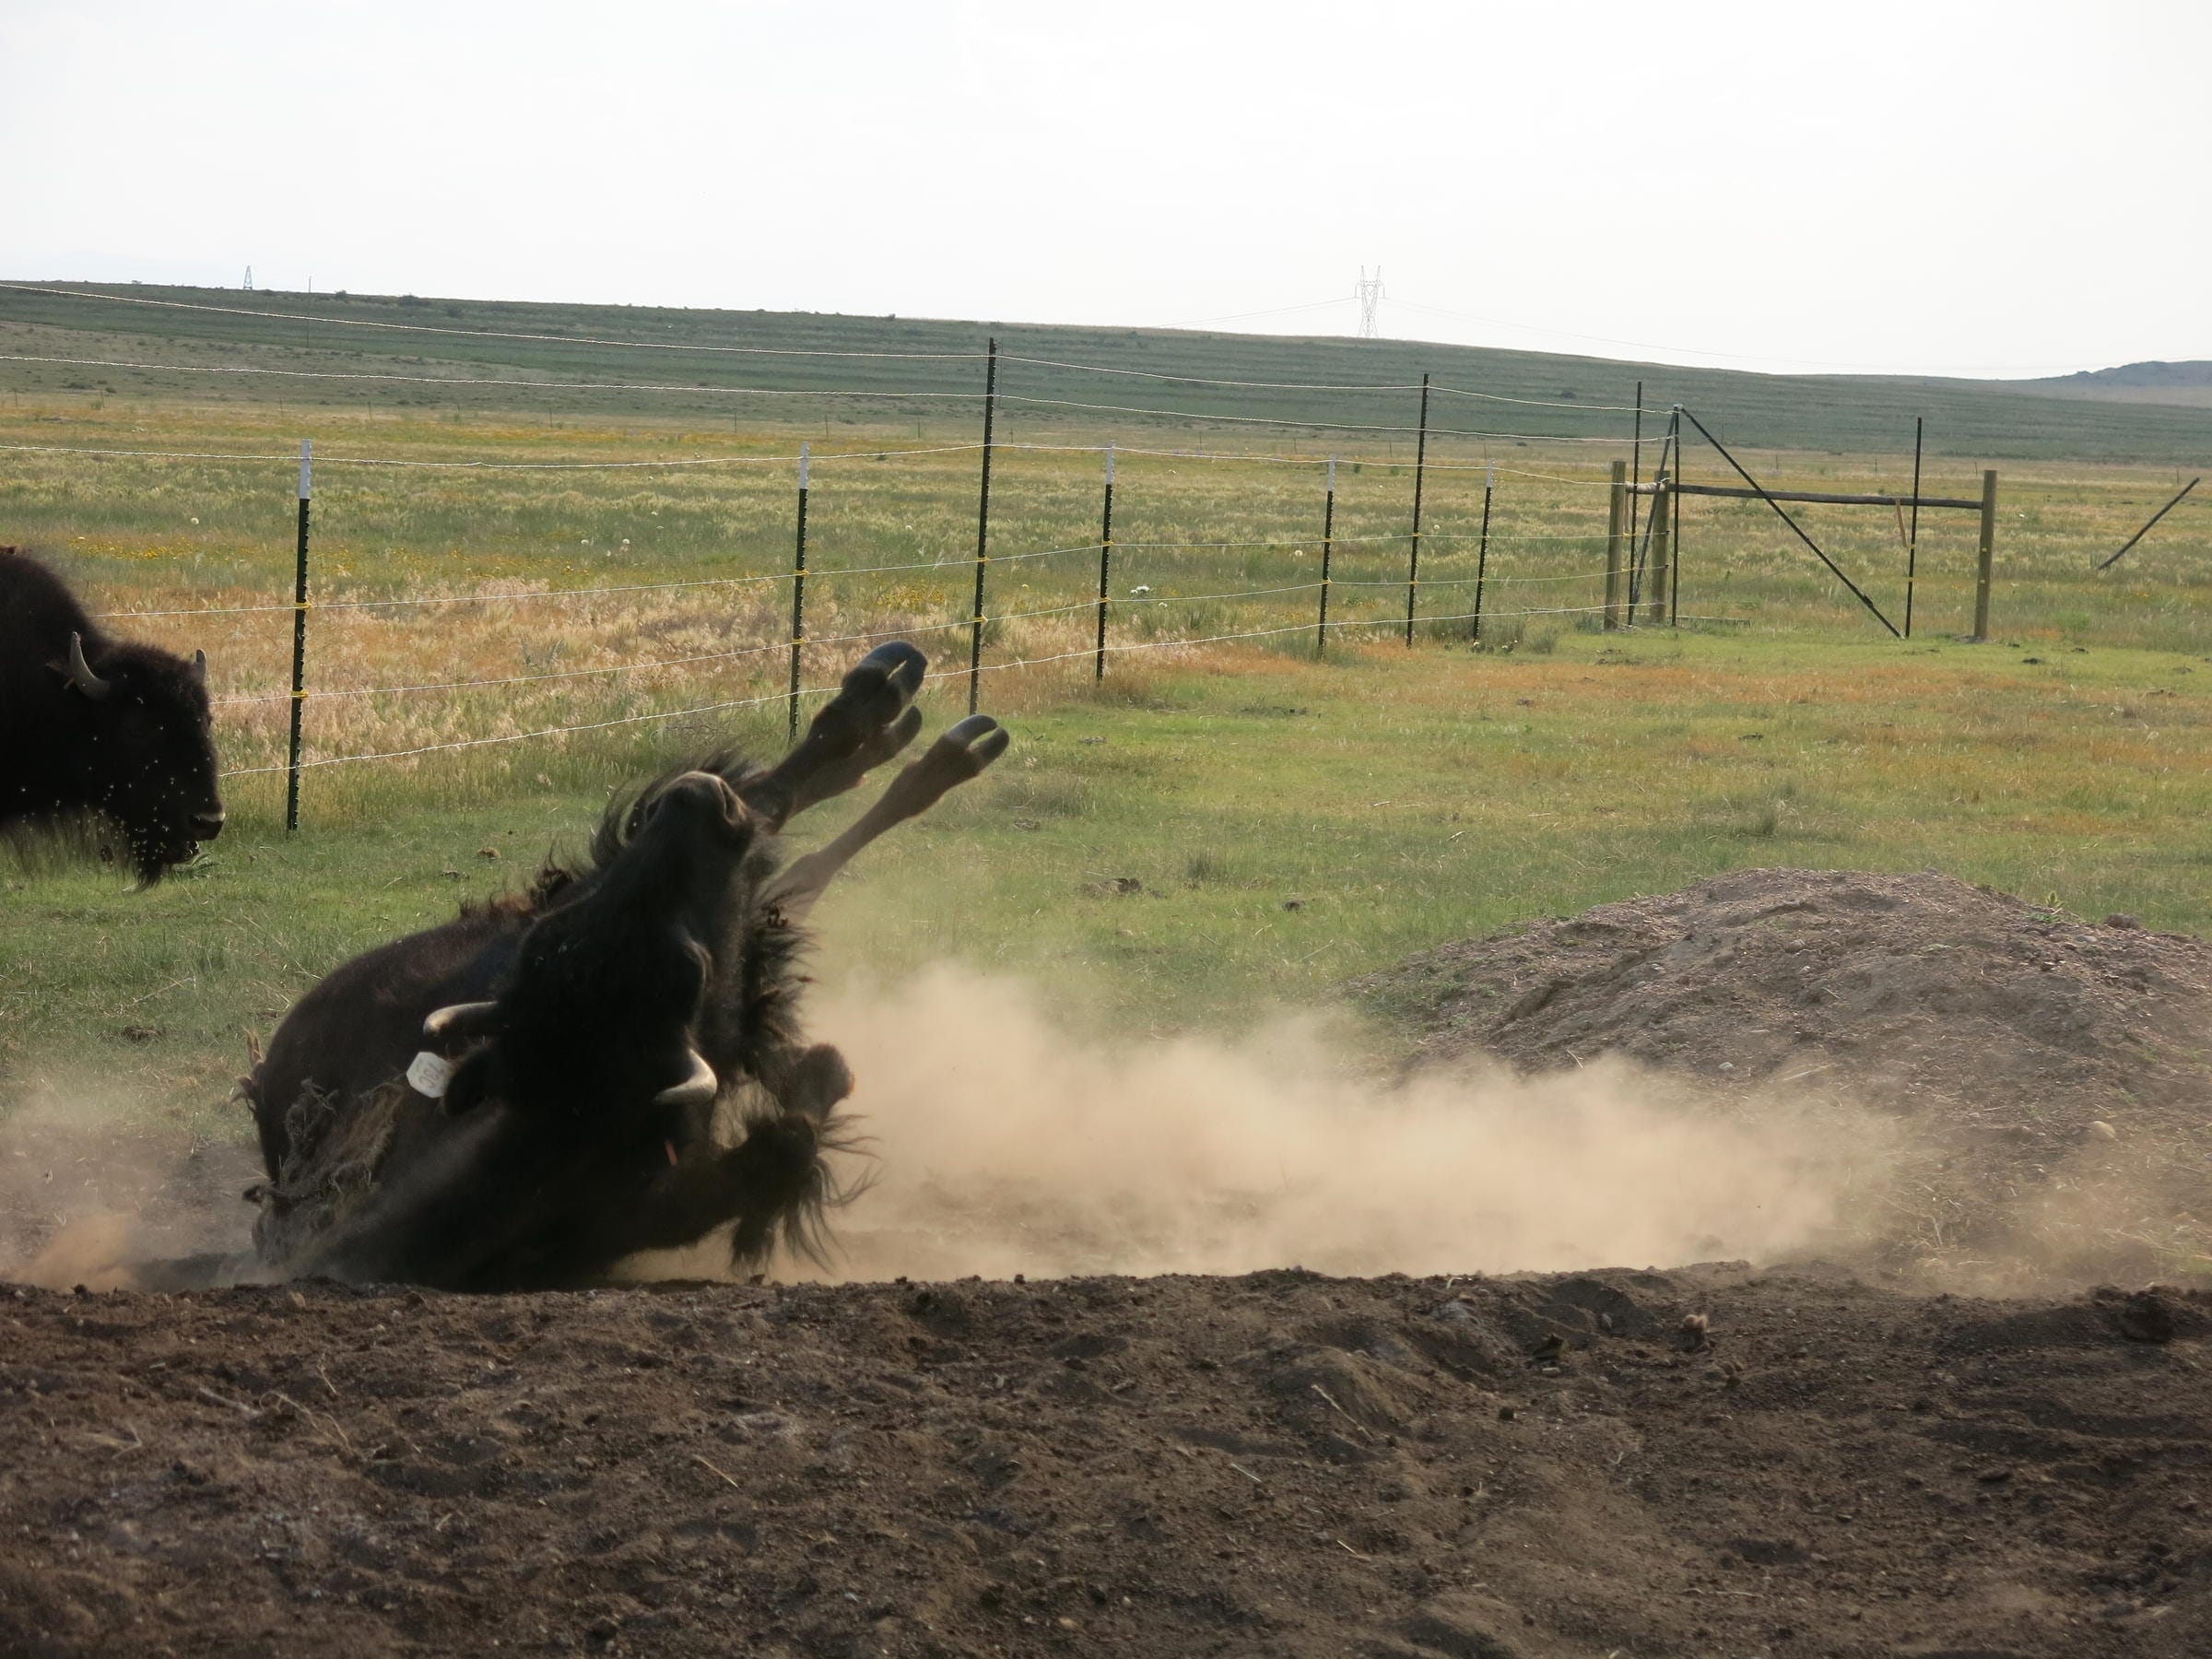 A bison rolls in the dirt.